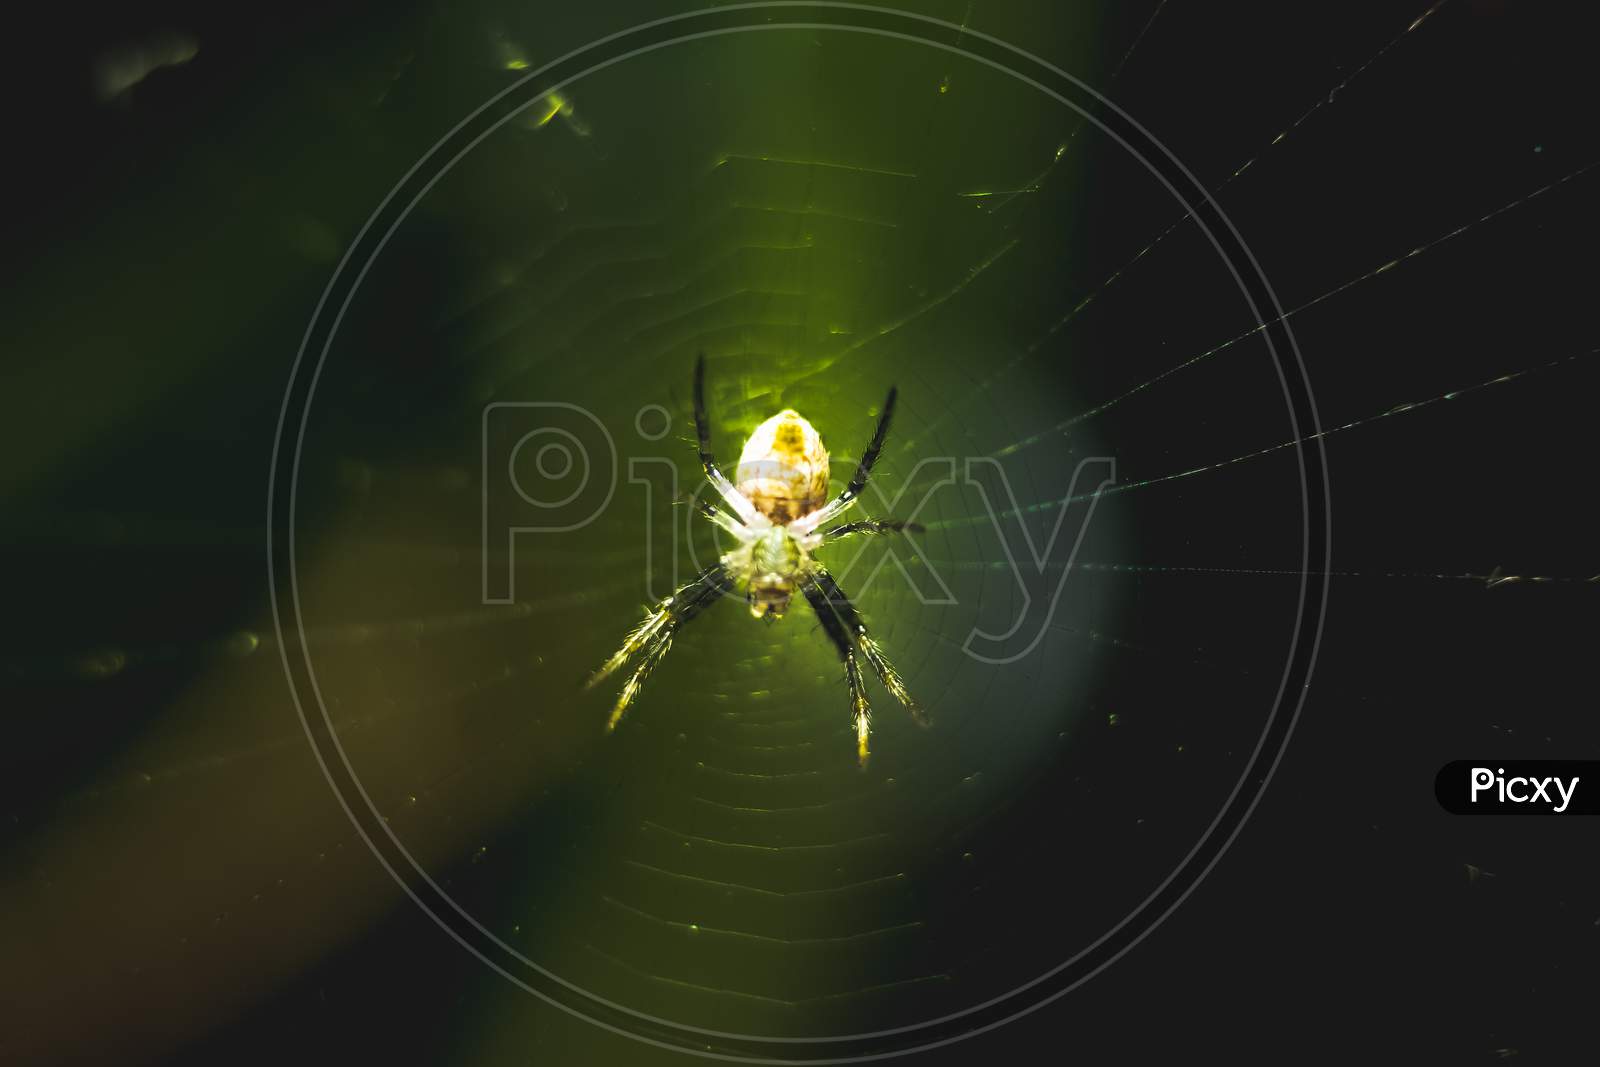 Spider On Web On Closeup Macro Photography. Small Spider On It Own Make Web Isolated On Dark Green Background. Unfinished Spider Web On Straight Line.